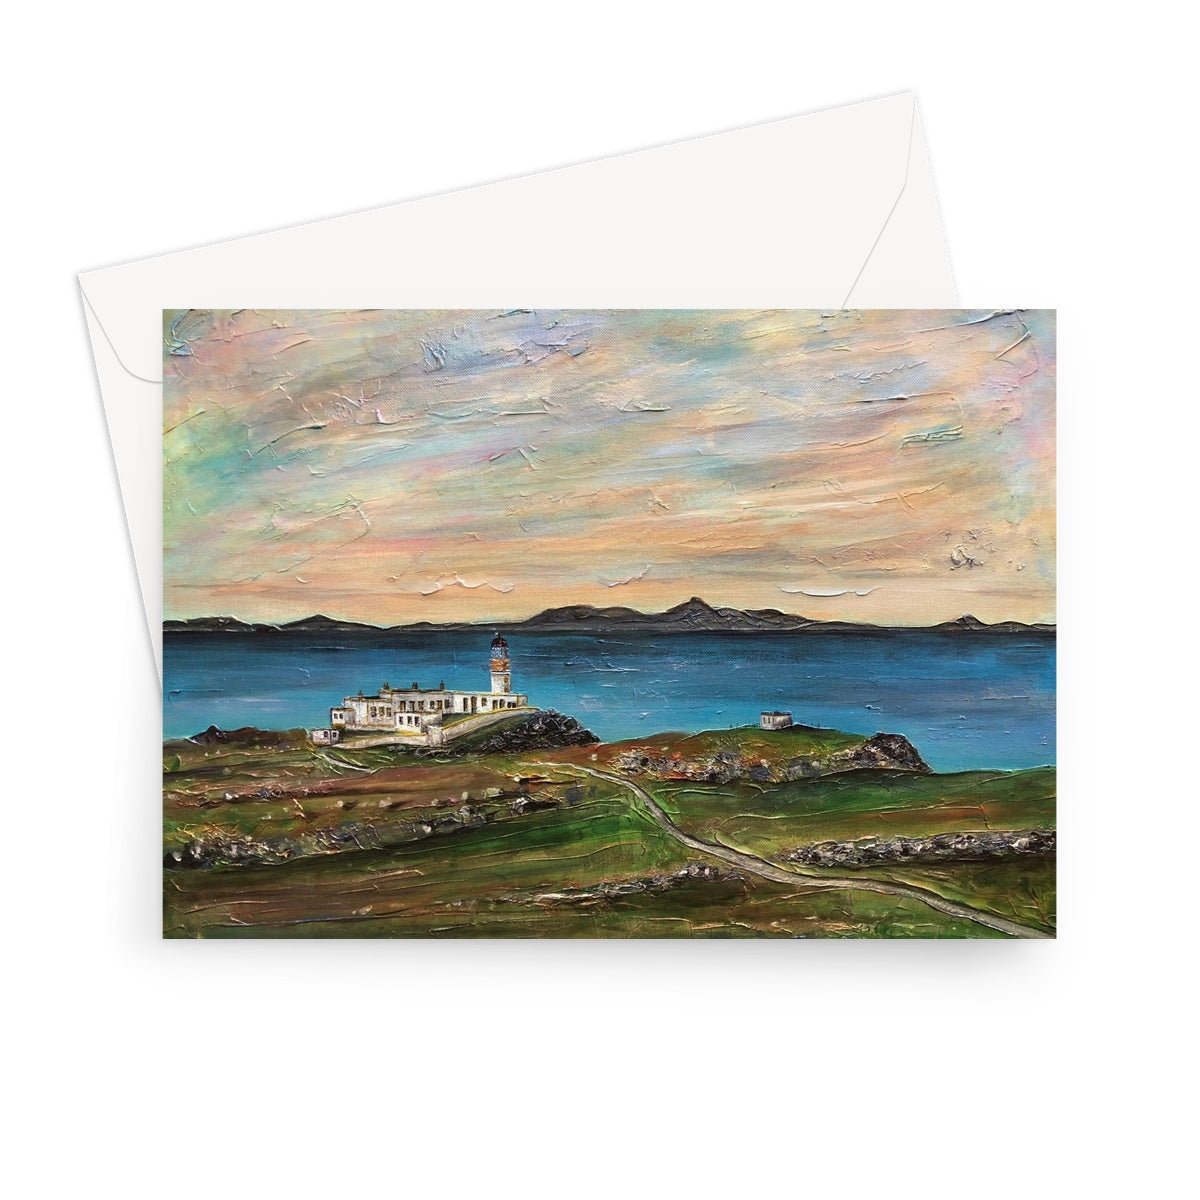 Neist Point Skye Art Gifts Greeting Card-Greetings Cards-Skye Art Gallery-7"x5"-1 Card-Paintings, Prints, Homeware, Art Gifts From Scotland By Scottish Artist Kevin Hunter